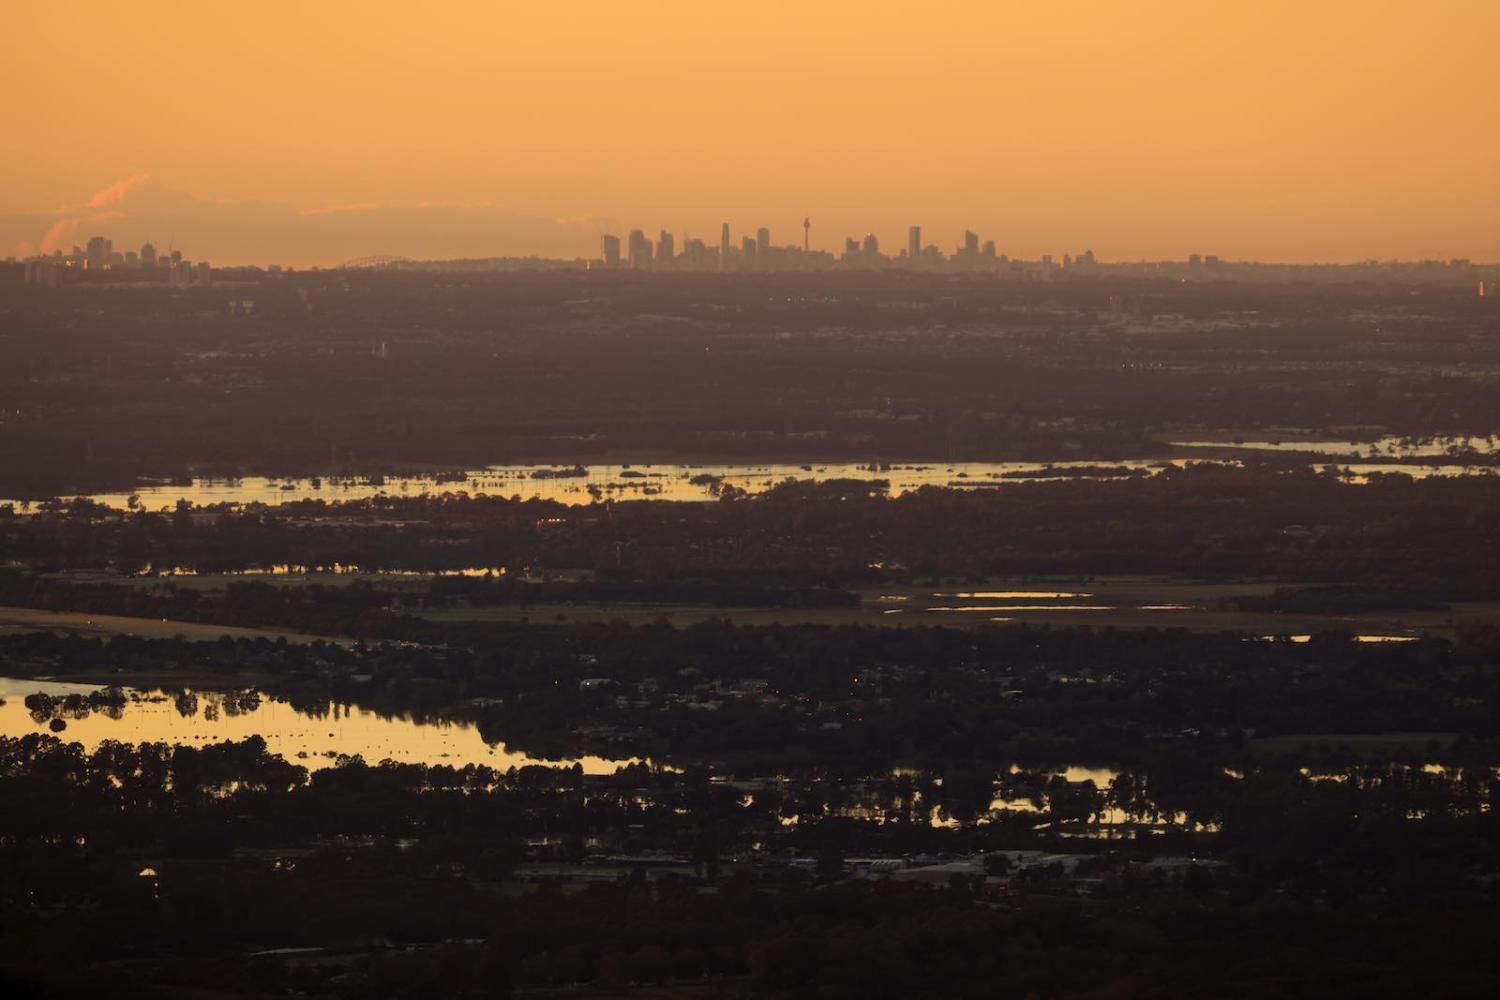 Floods in the Hawkesbury River region near Kurrajong Heights, with the Sydney skyline in the distance, 24 March 2021 (Mark Evans/Getty Images)